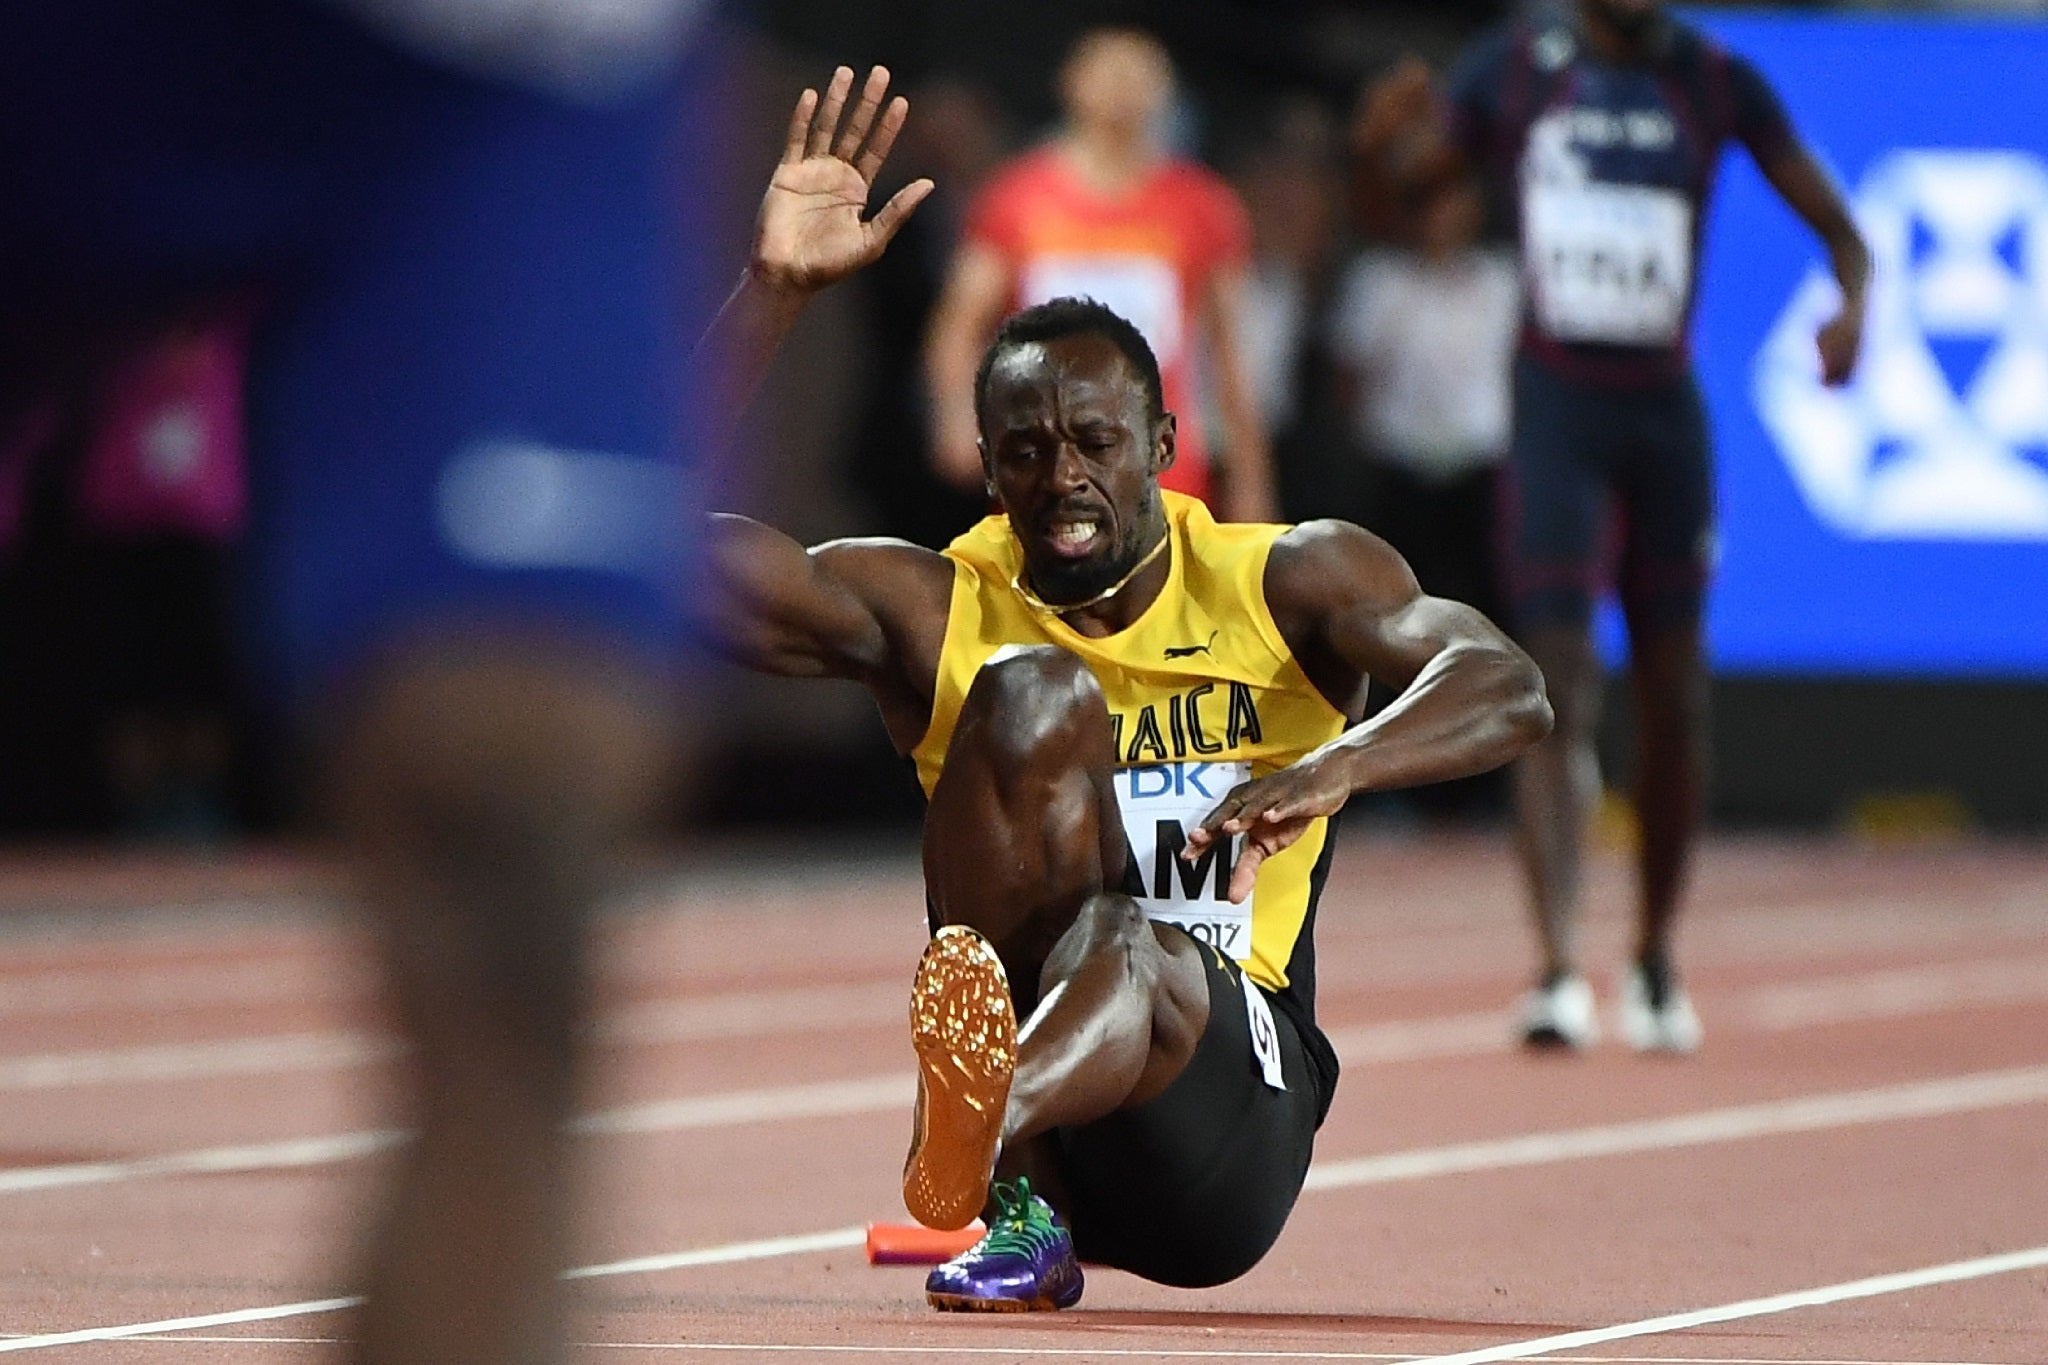 Usain Bolt crashed out of his final appearance as injury struck him down in the 4x100m men's relay